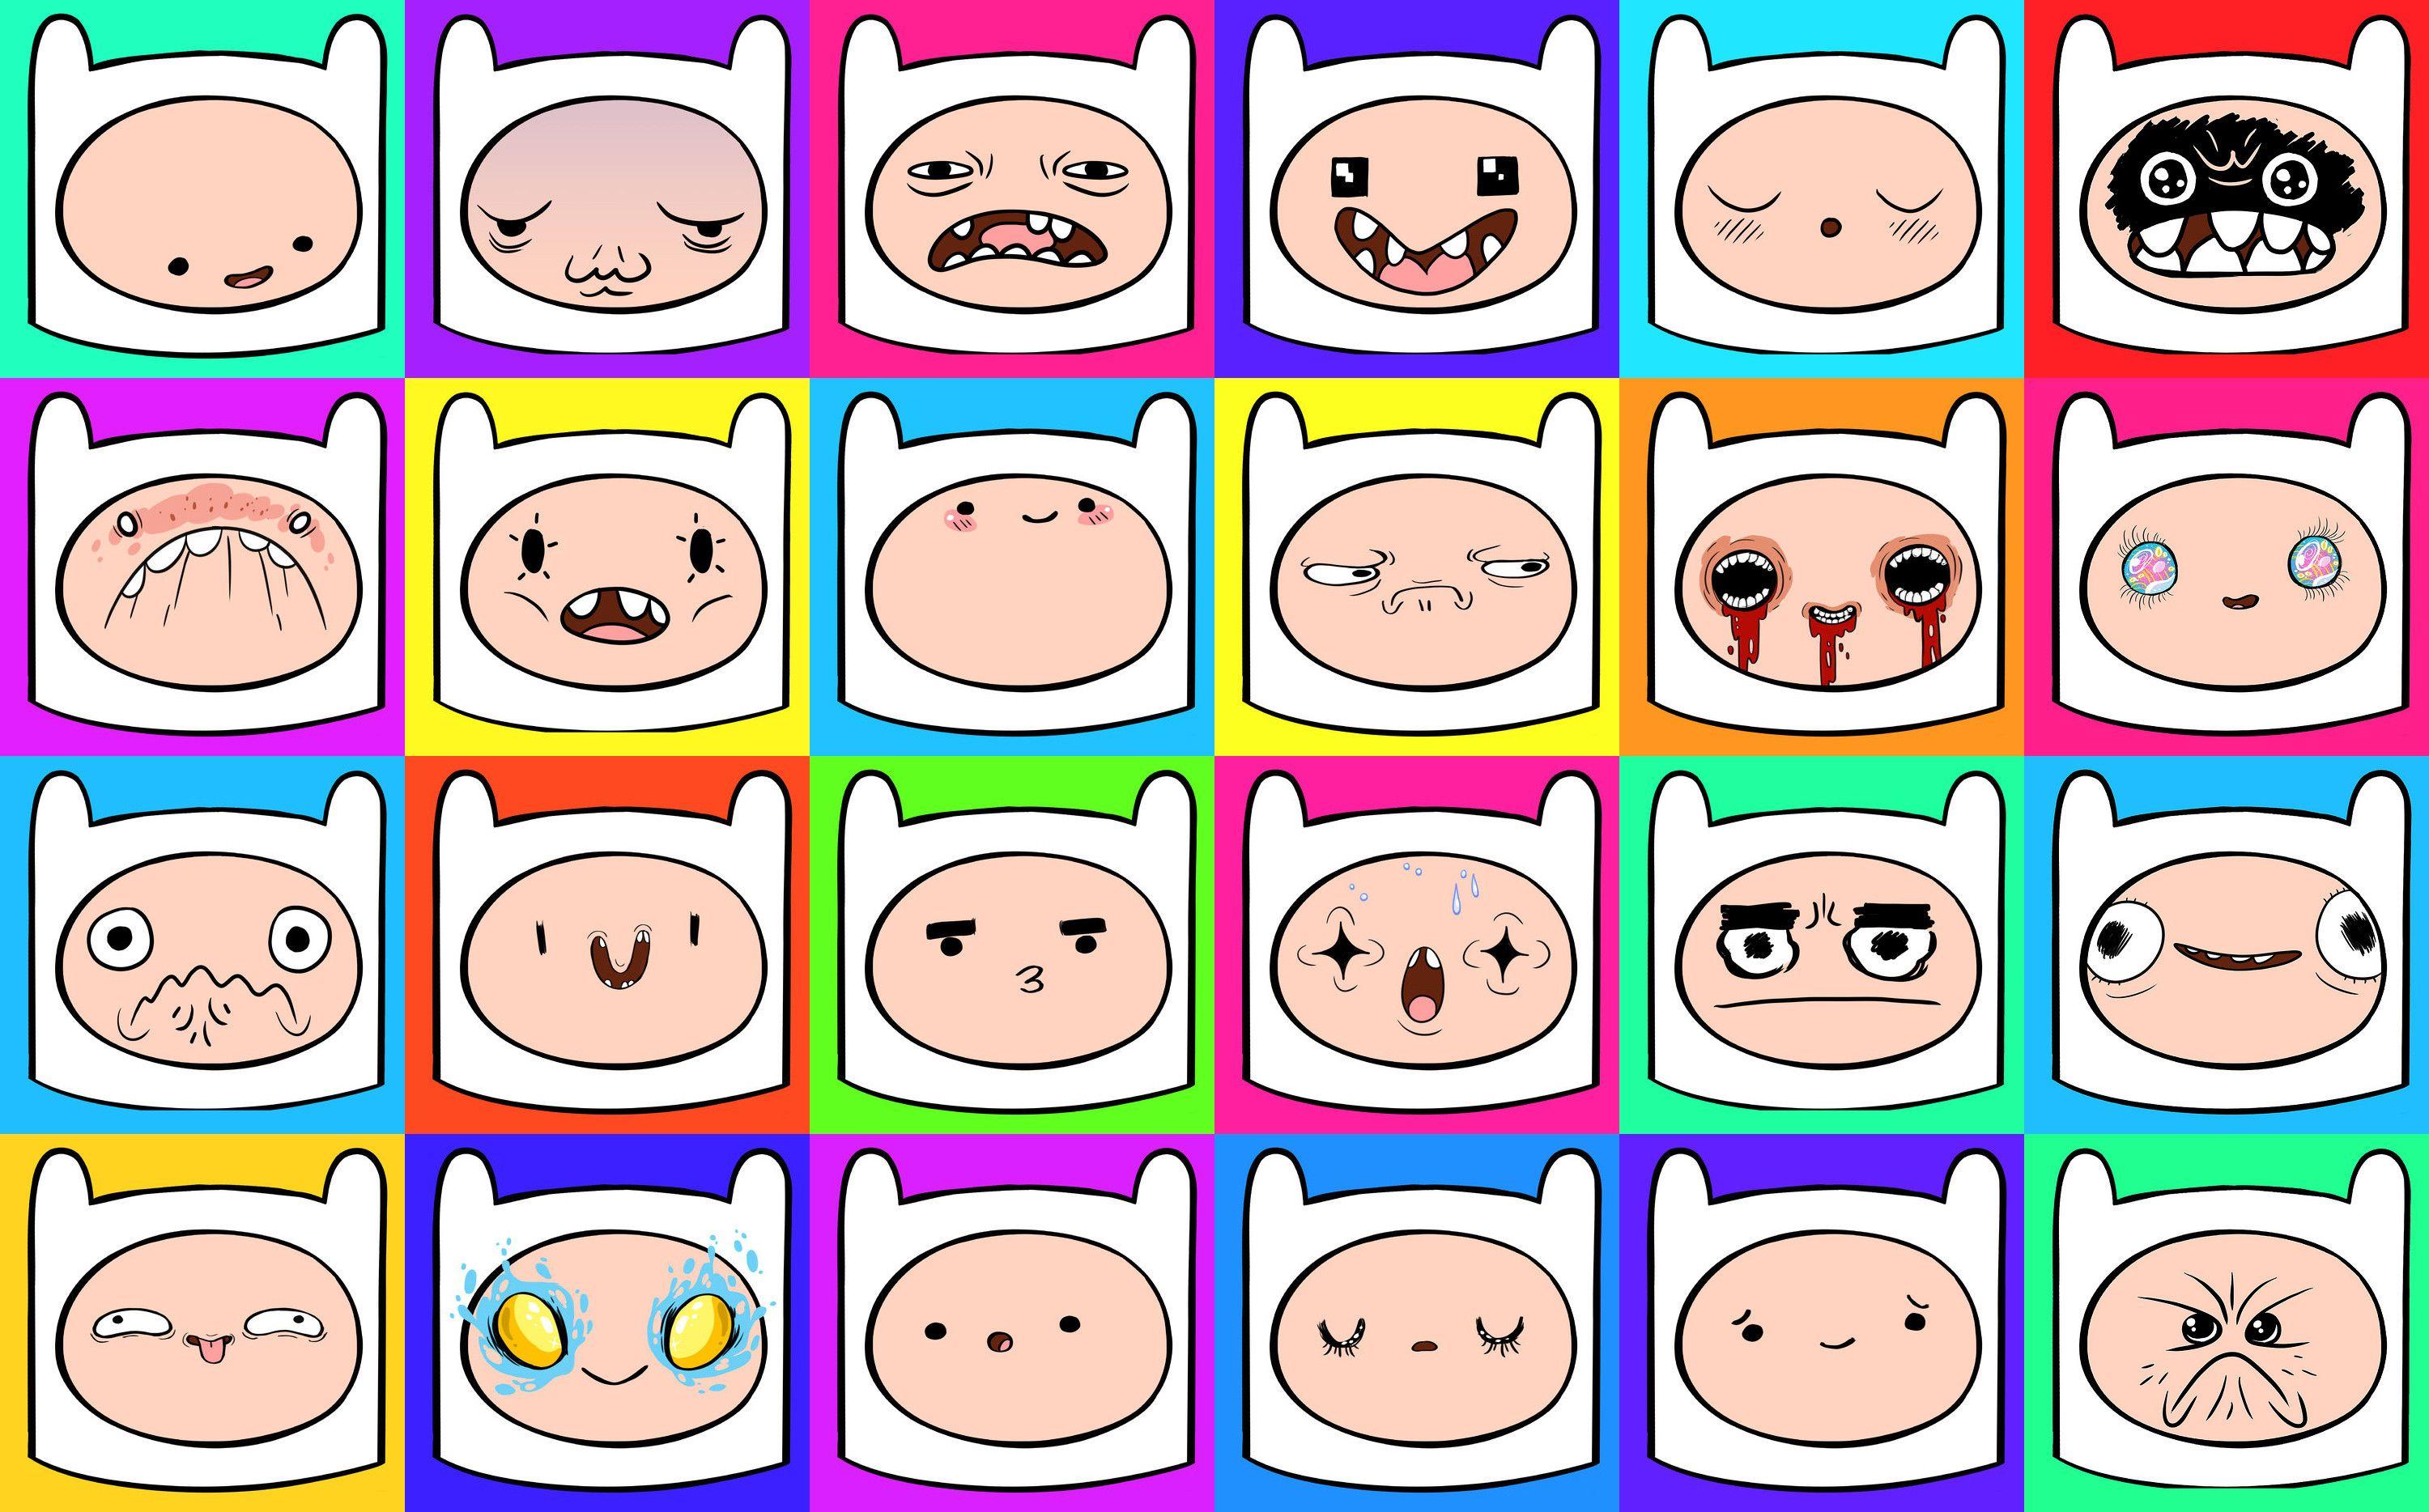 The Many Faces of Finn. Enemy of Peanuts